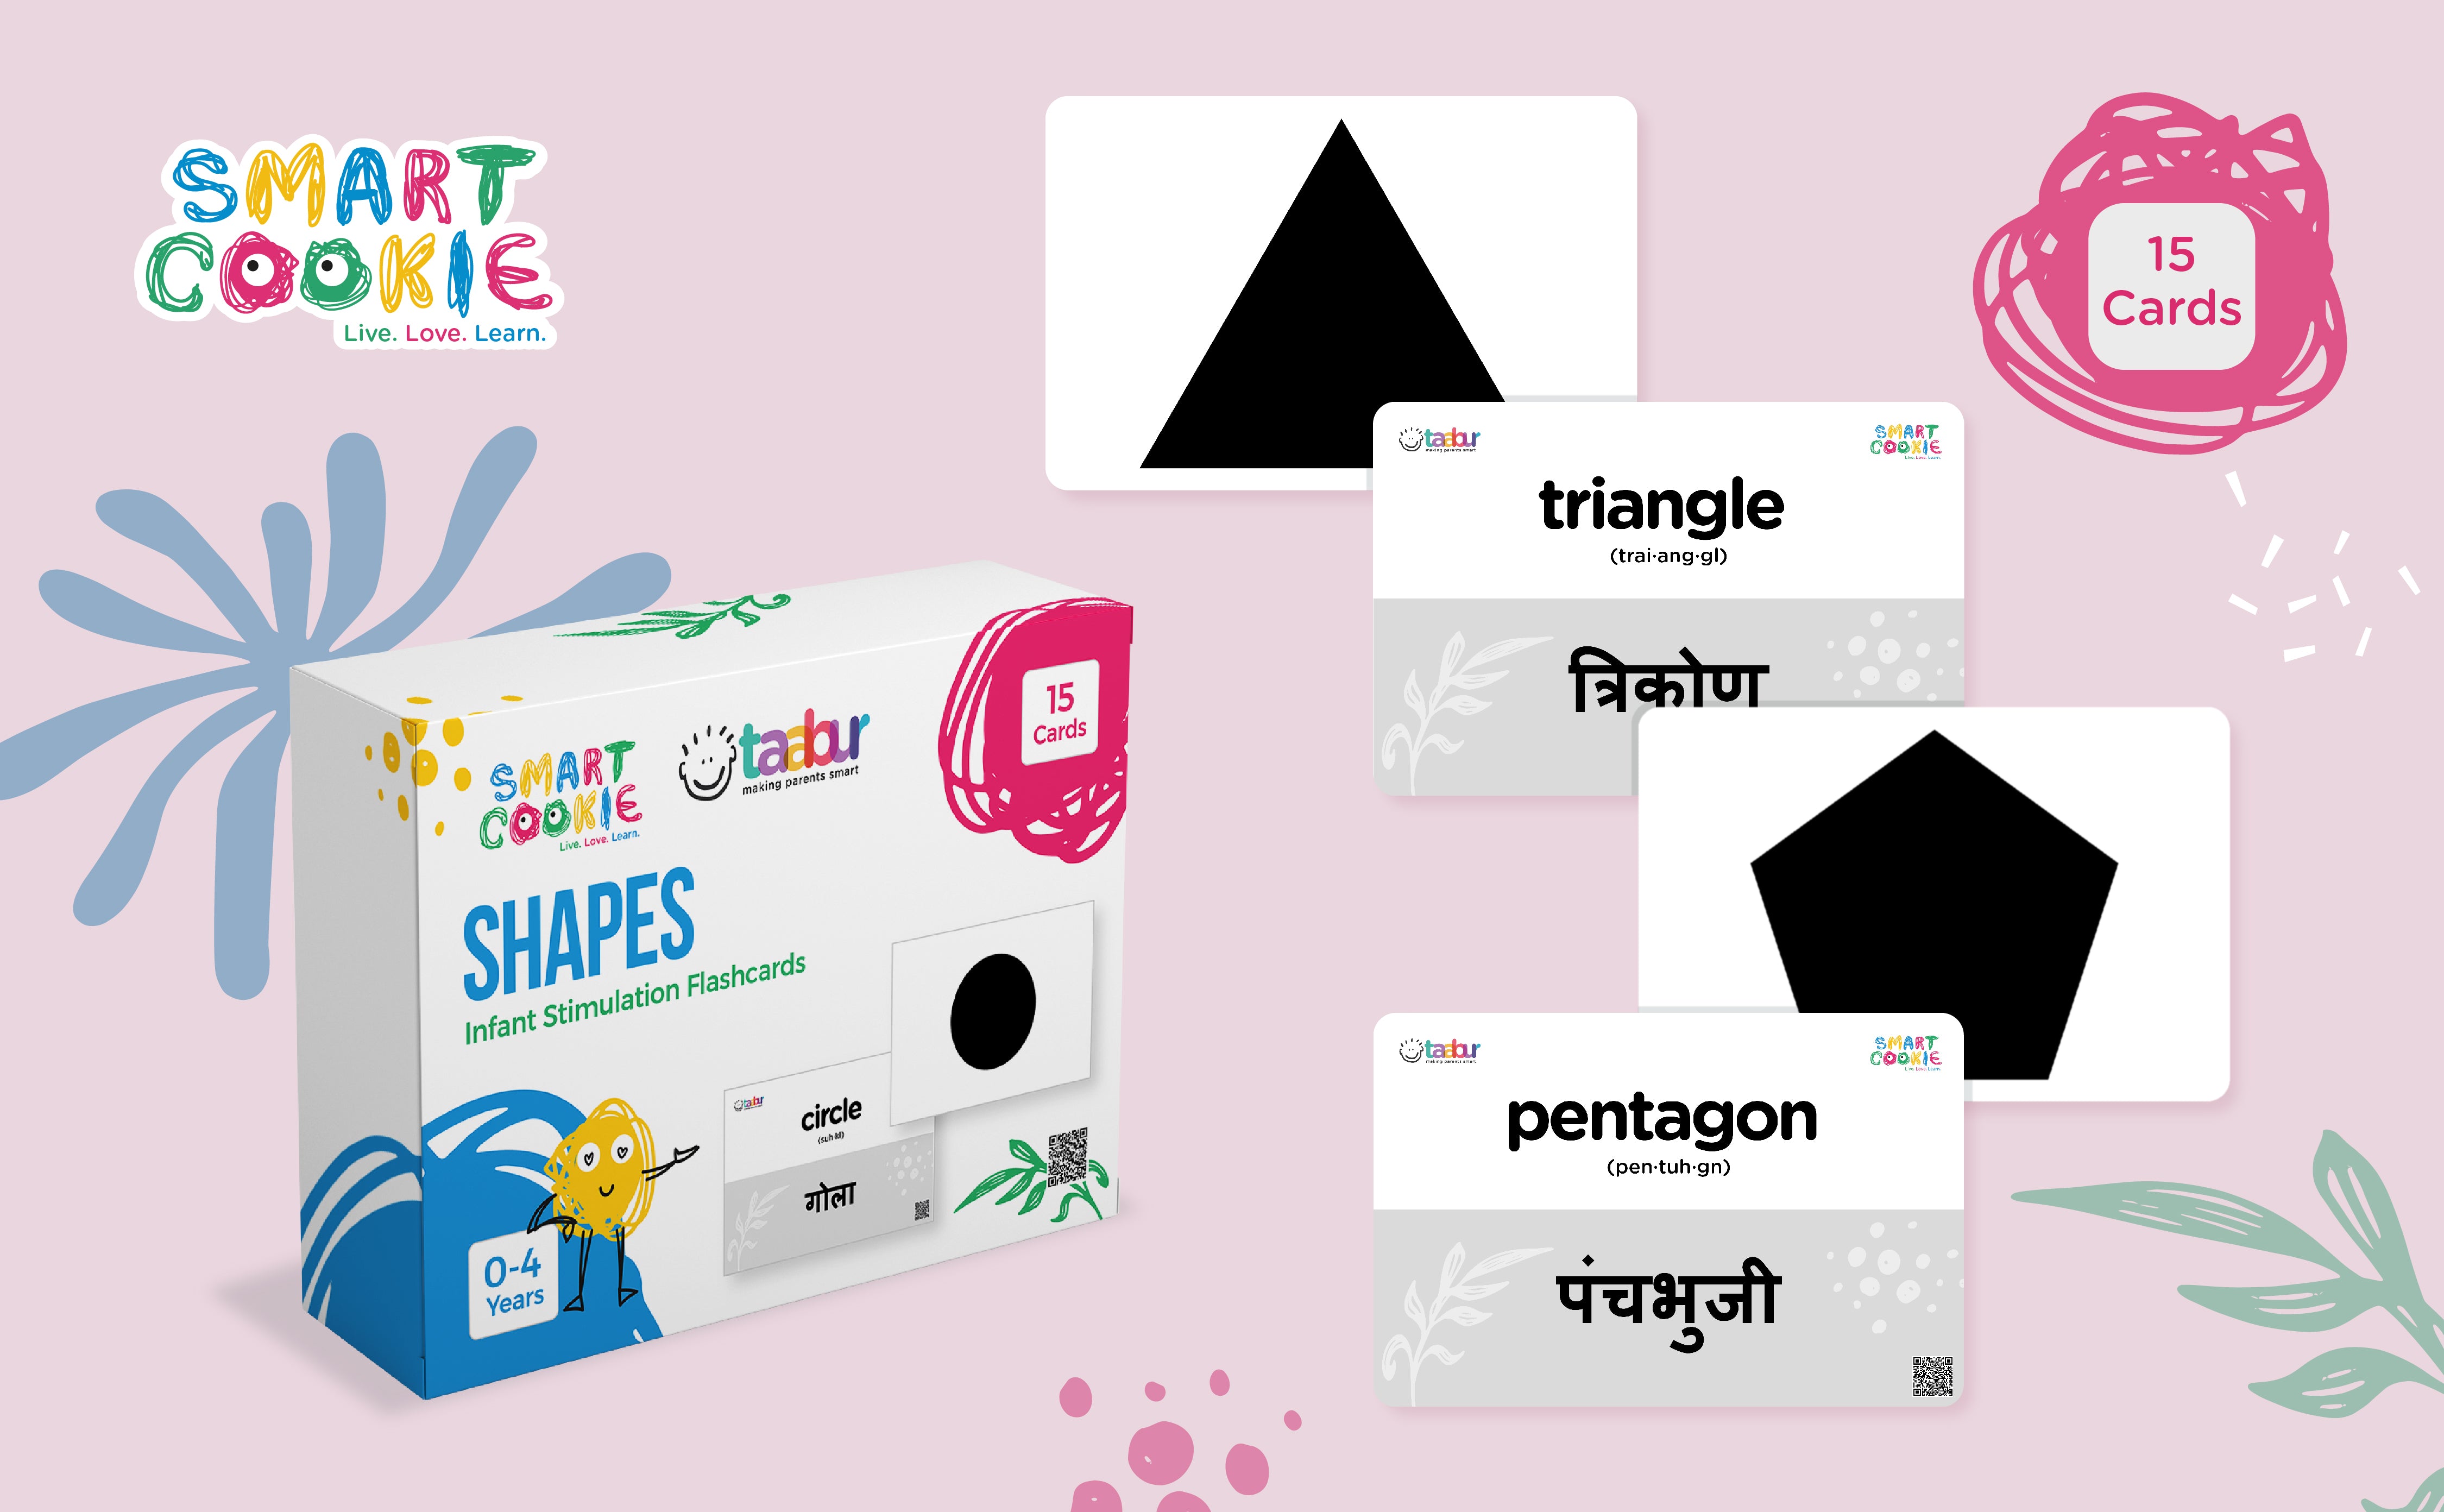 Shapes – Infant Stimulation Flashcards (Black & White) (15 Cards) - for Kids Aged 0 to 4 Years Old